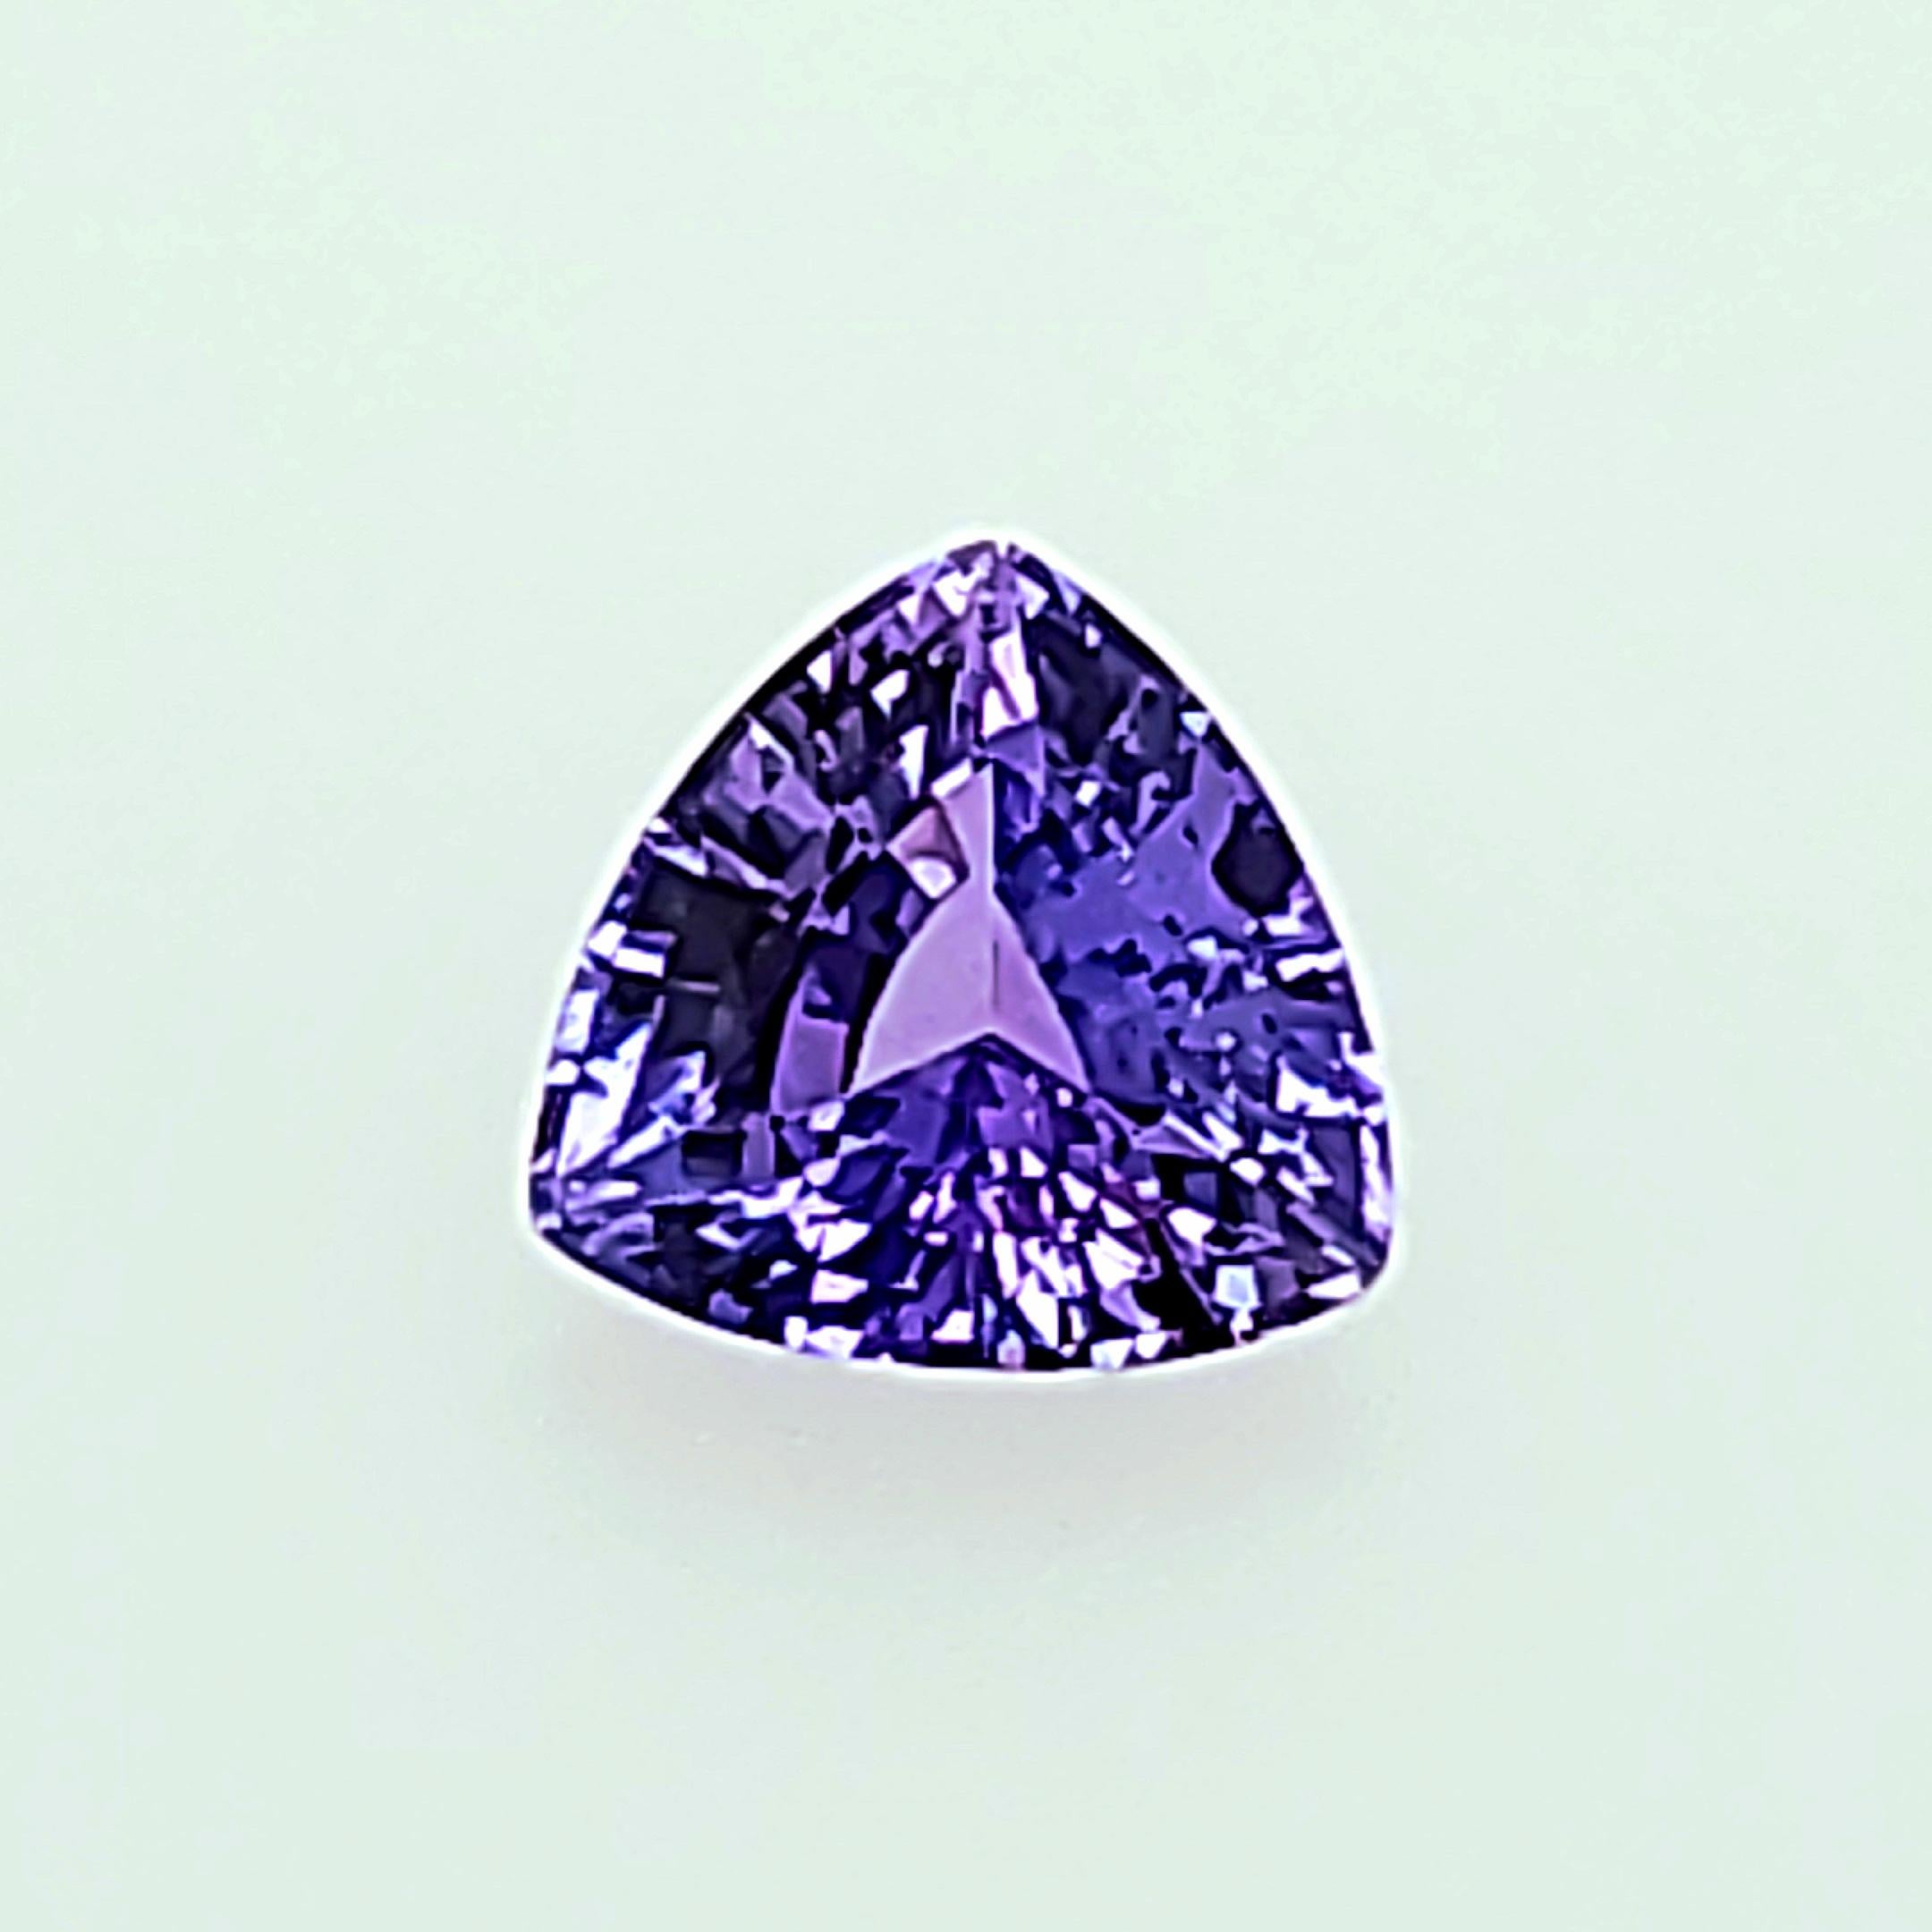 Bluish Purple to Purple depending on the lighting and wavelengths available, this 1.52ct Trilliant Sapphire could be a color shifint Sapphire.  Very Brilliant and Eye Catching and catches the light even under low light levels.  Most people think